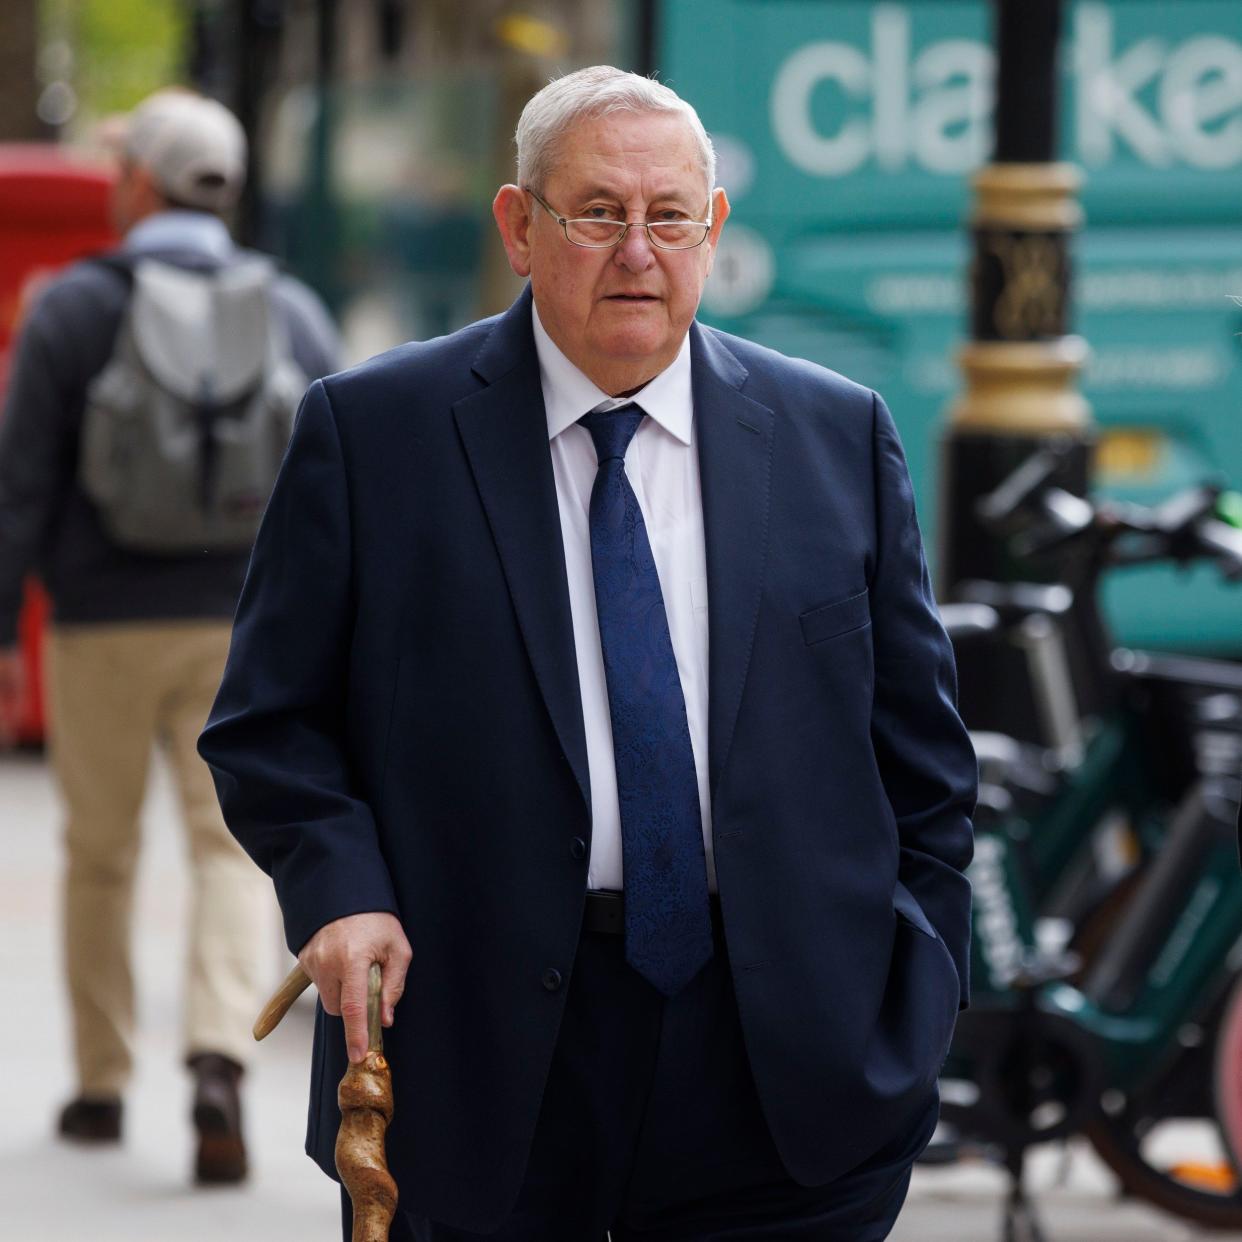 David Mills, the former Post Office chief executive, has arrived to give evidence at the inquiry this afternoon